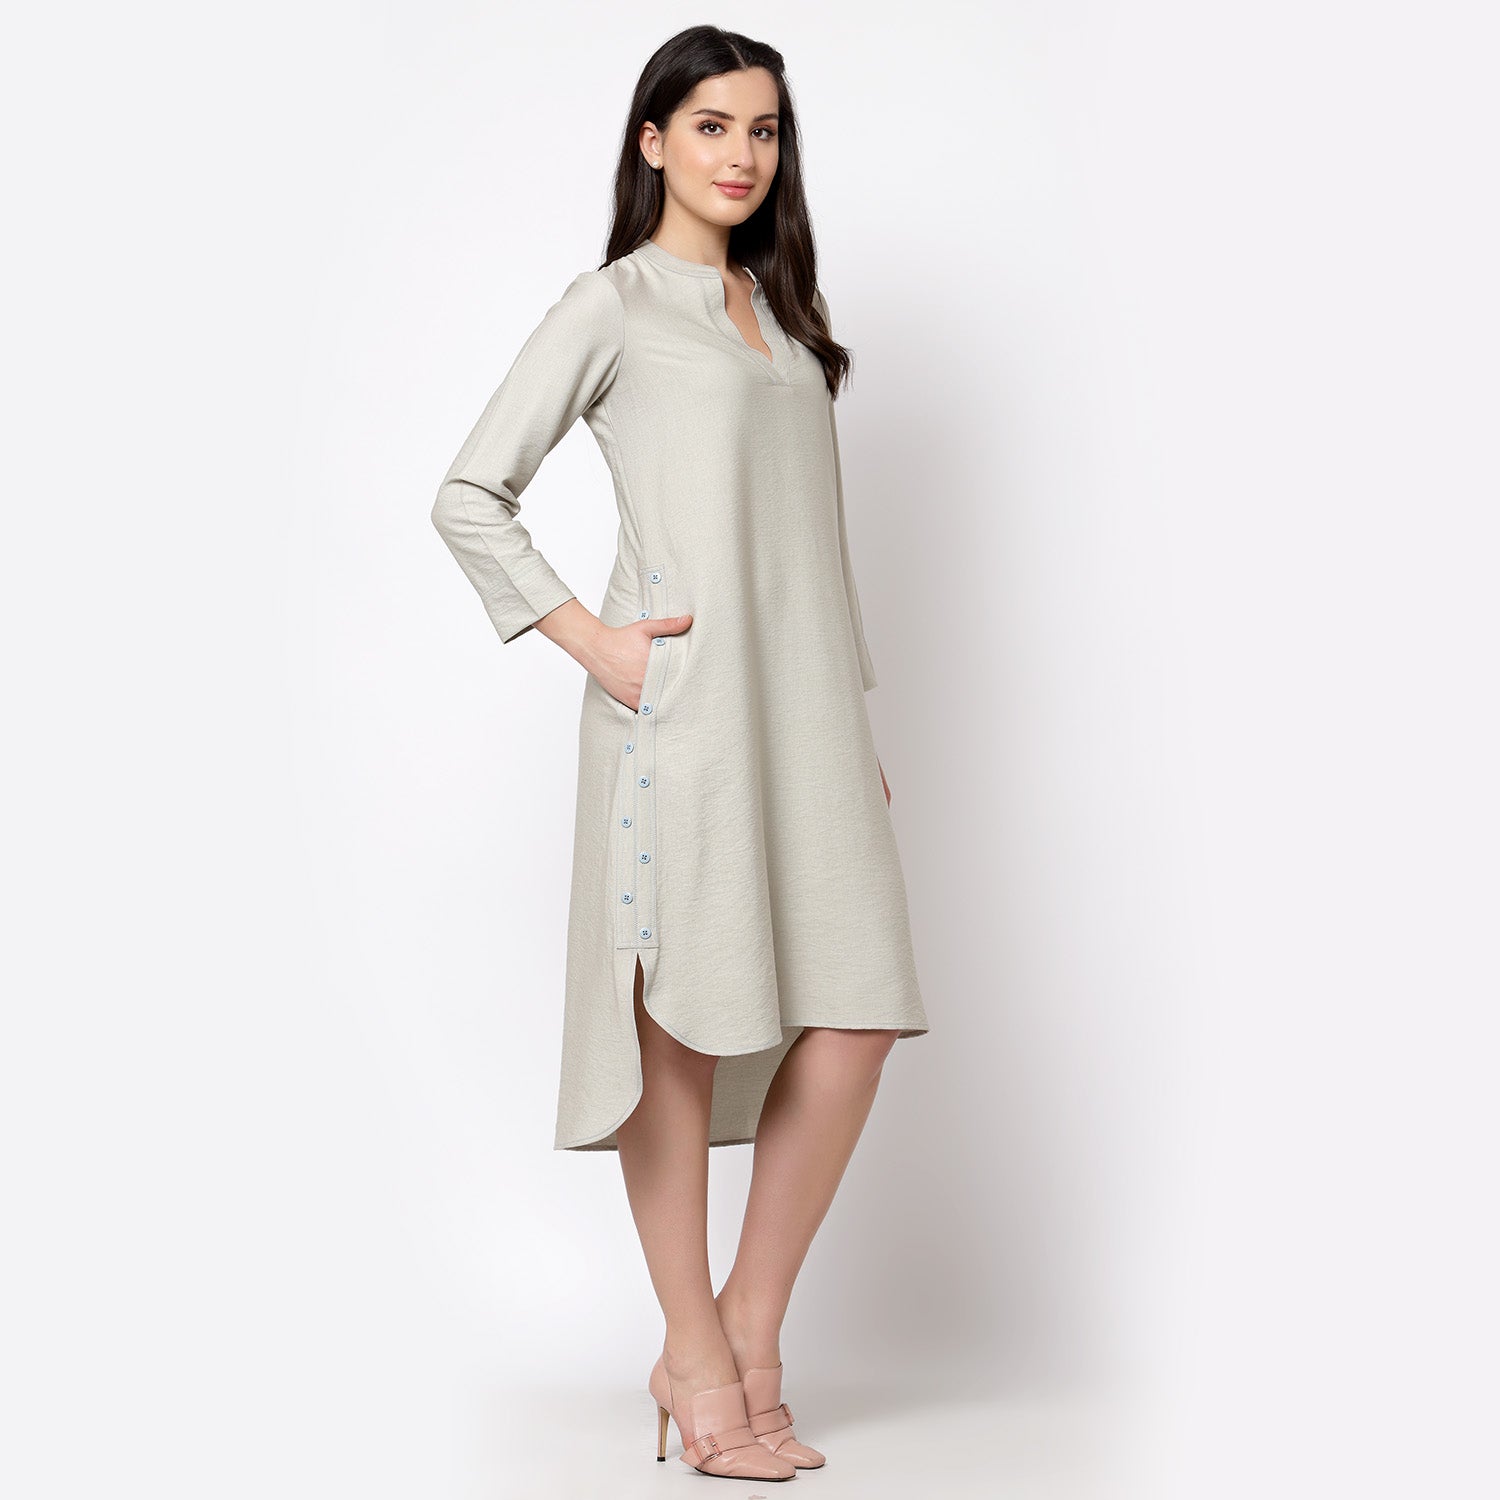 Grey linen kurta style tunic with buttons